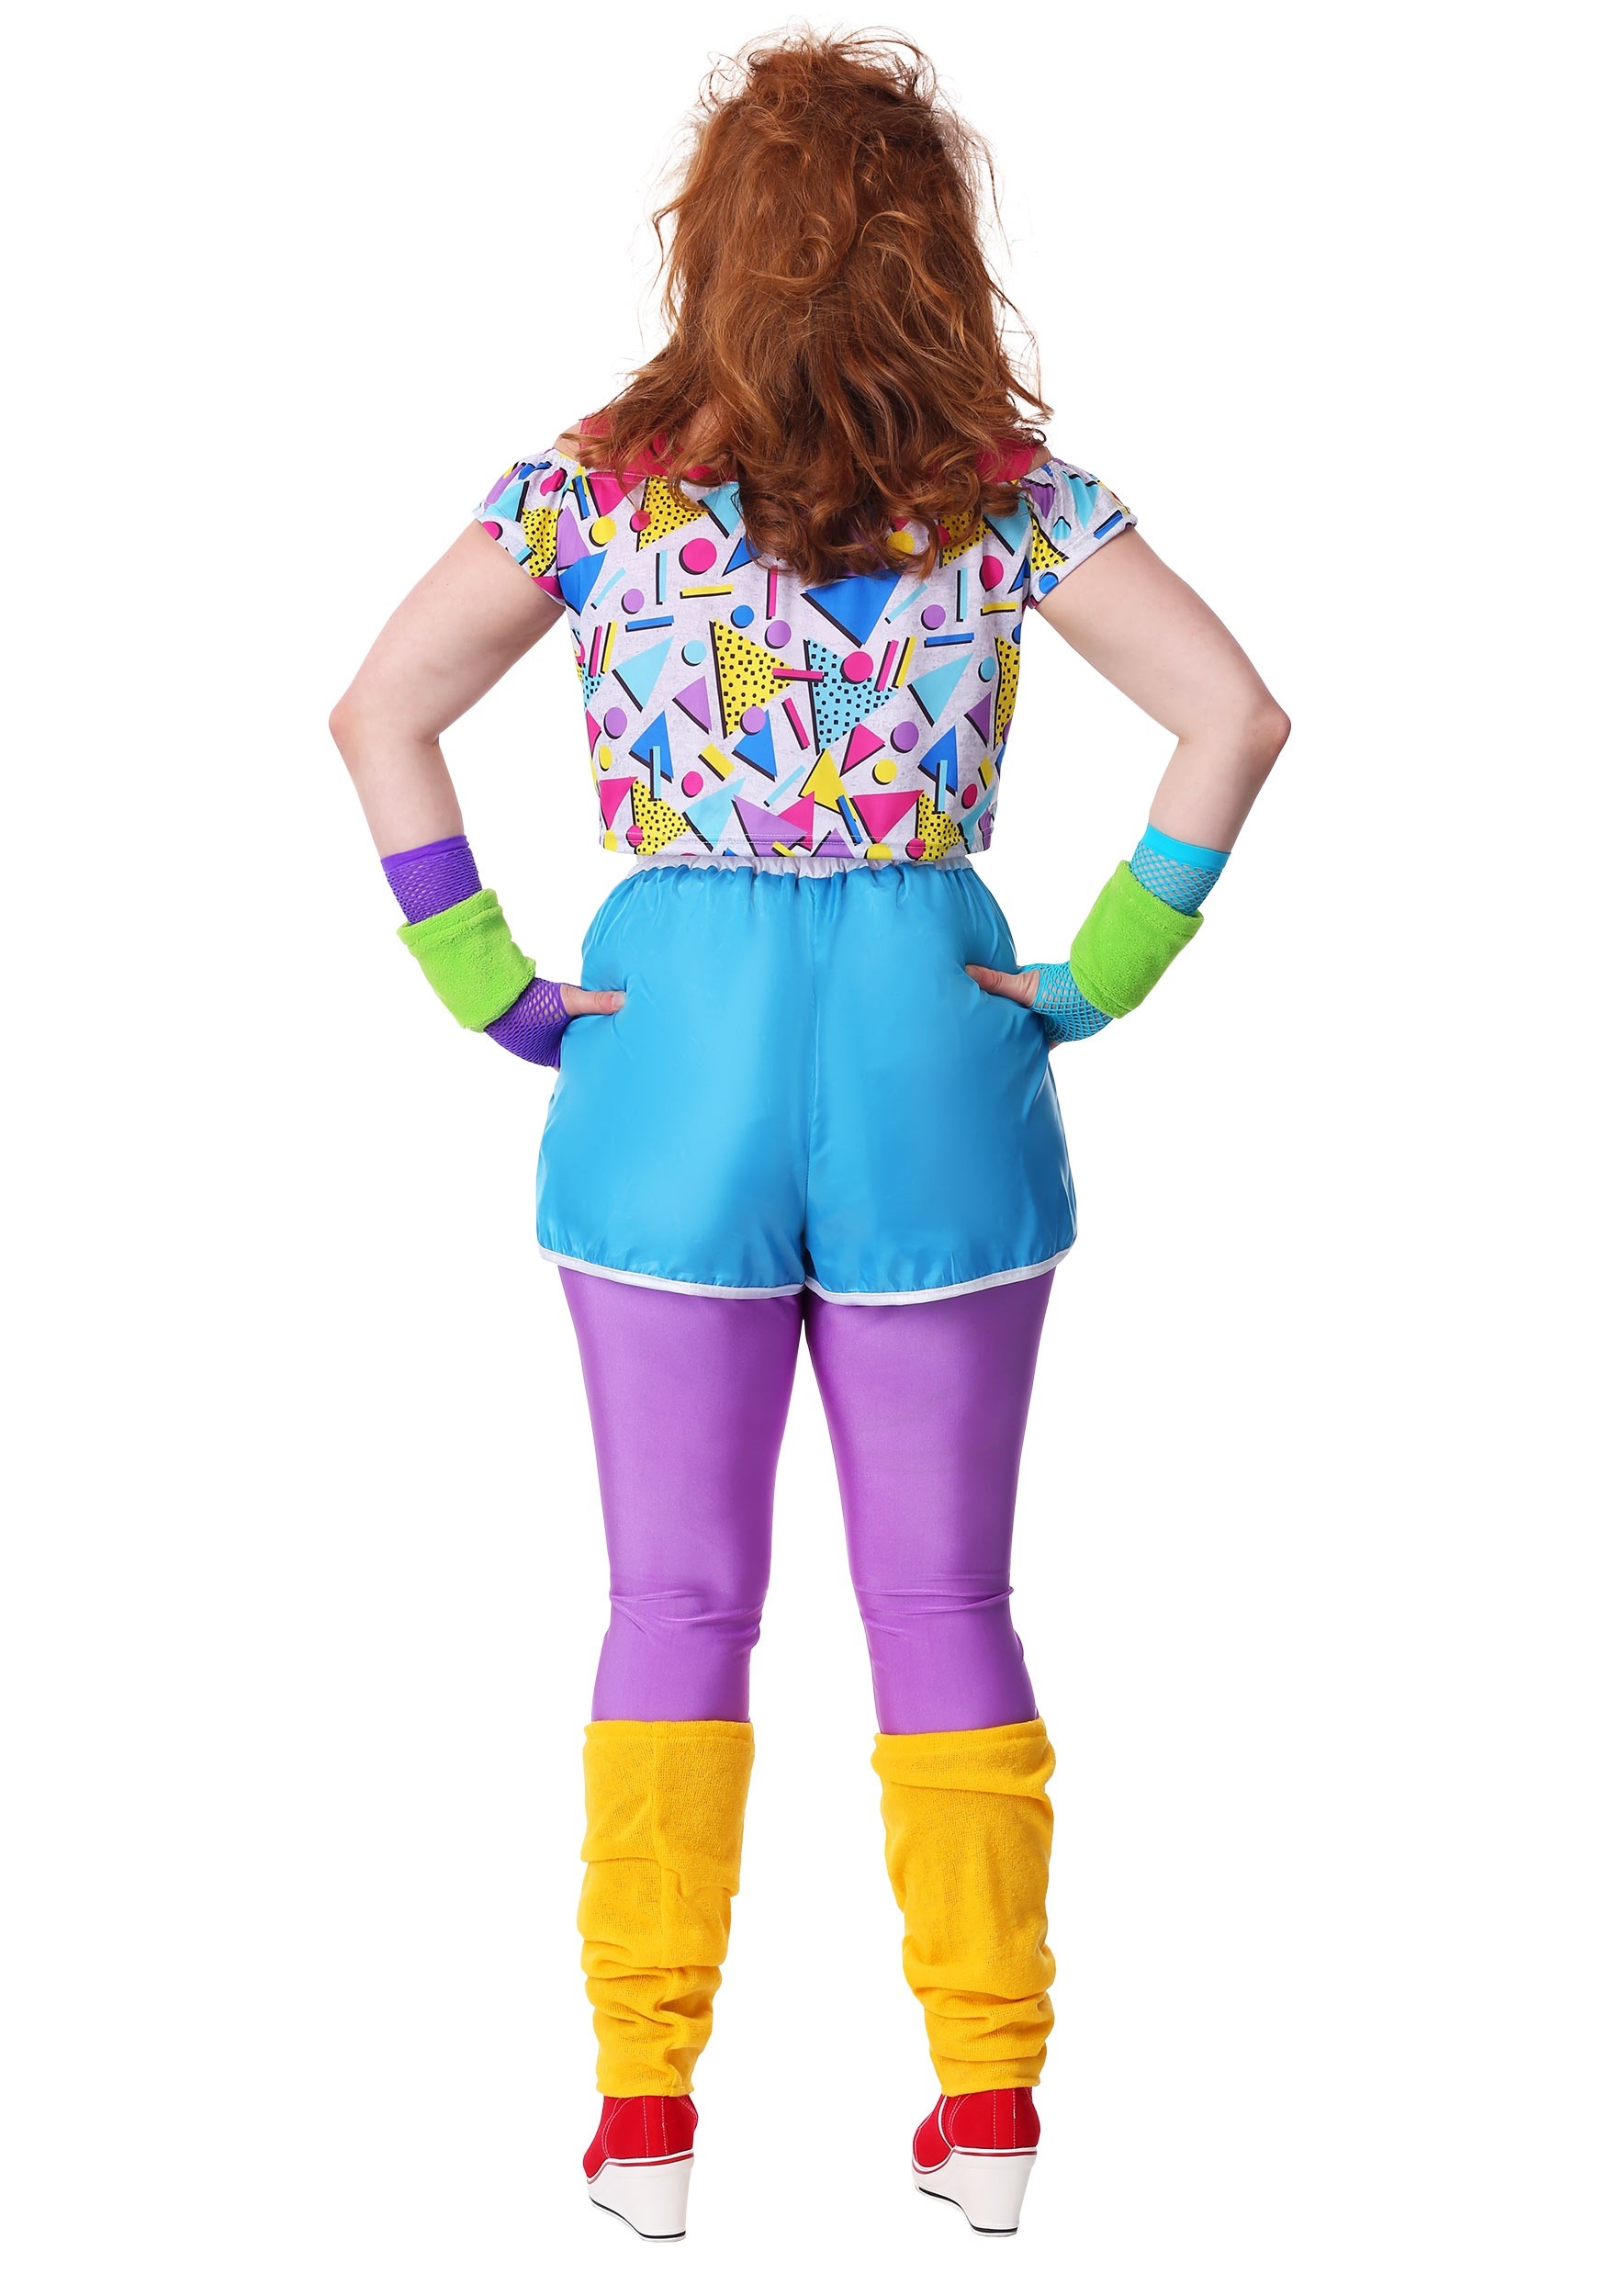 Plus Size Workout Video Star Costume 